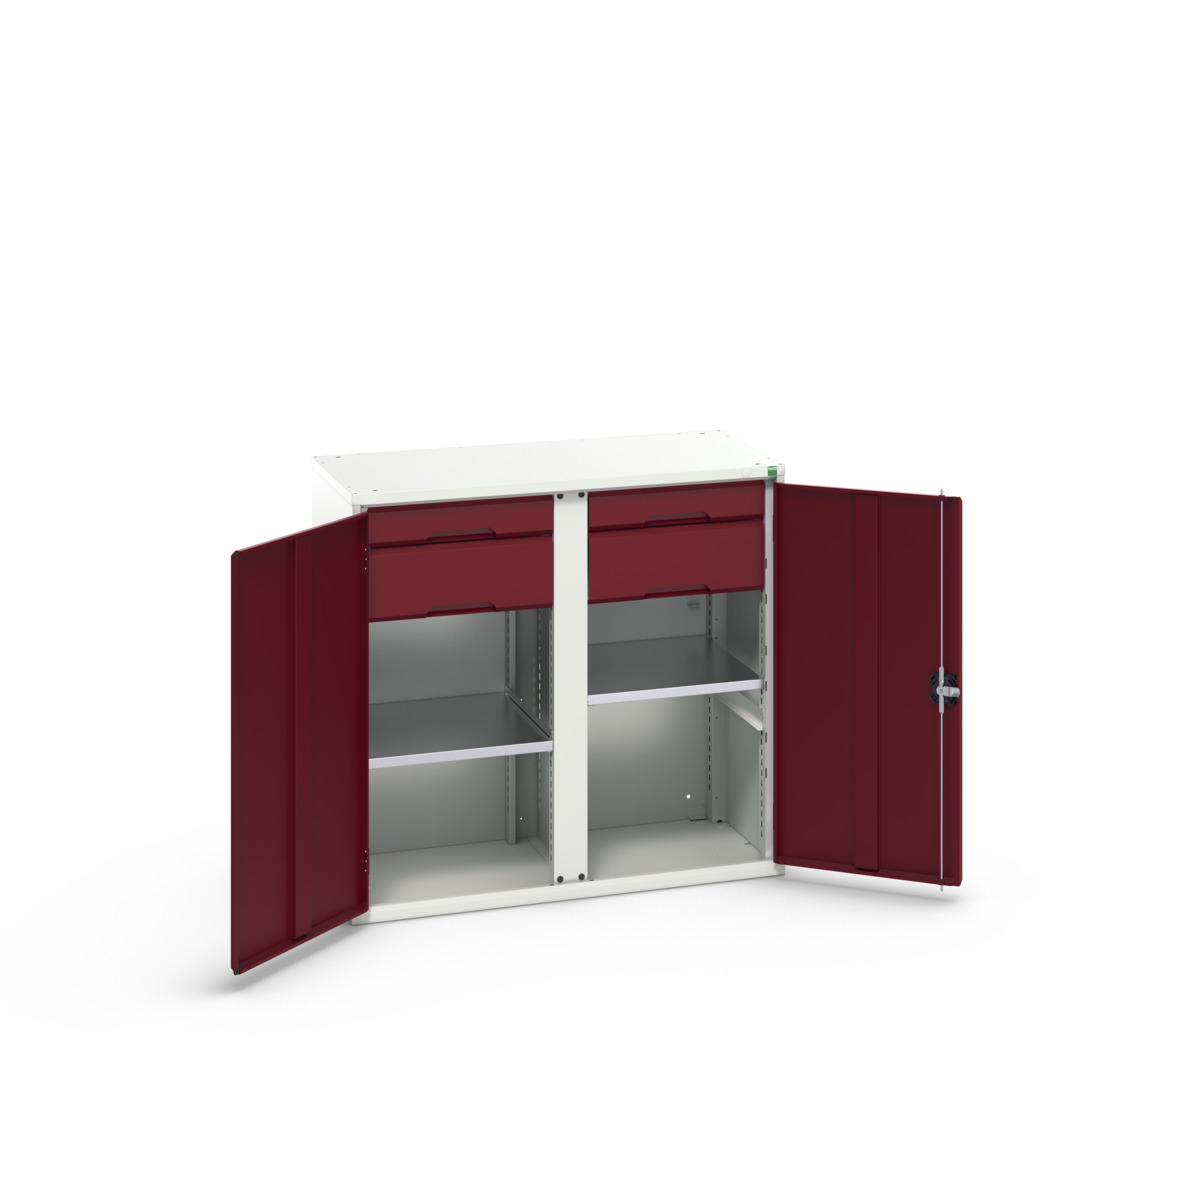 16926556.24 - verso kitted cupboard